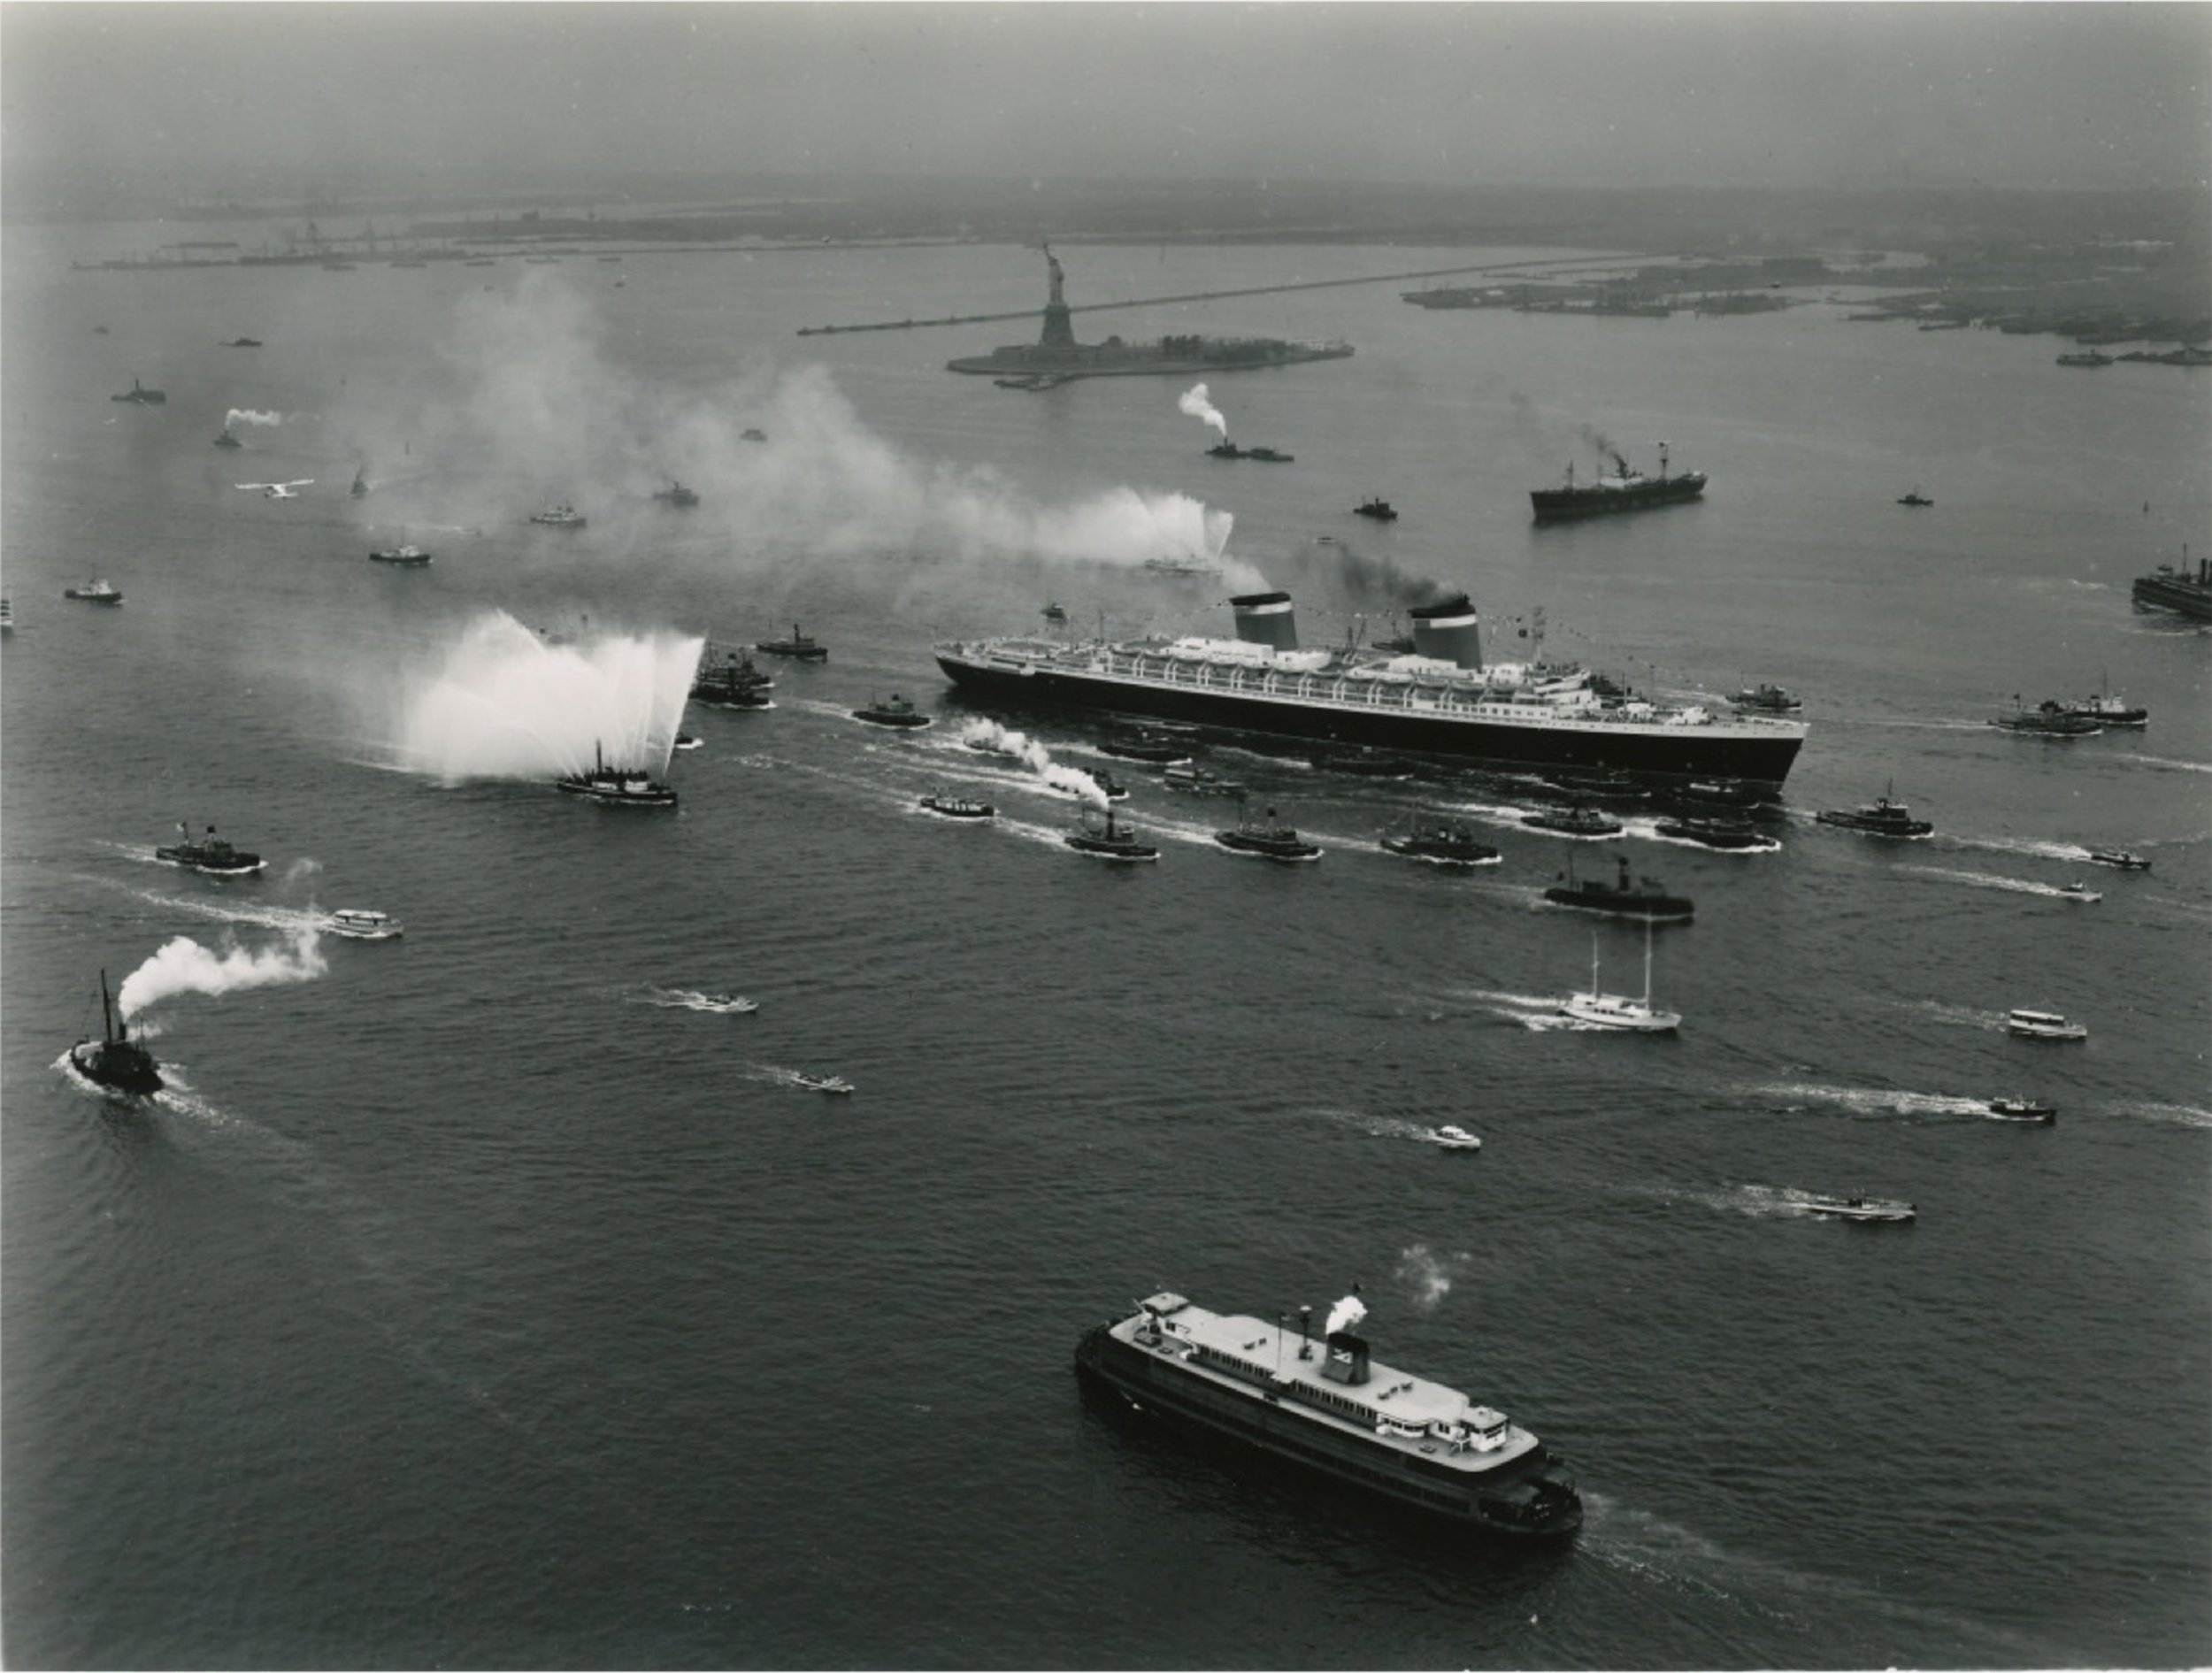 The SS United States returning to New York from her maiden voyage